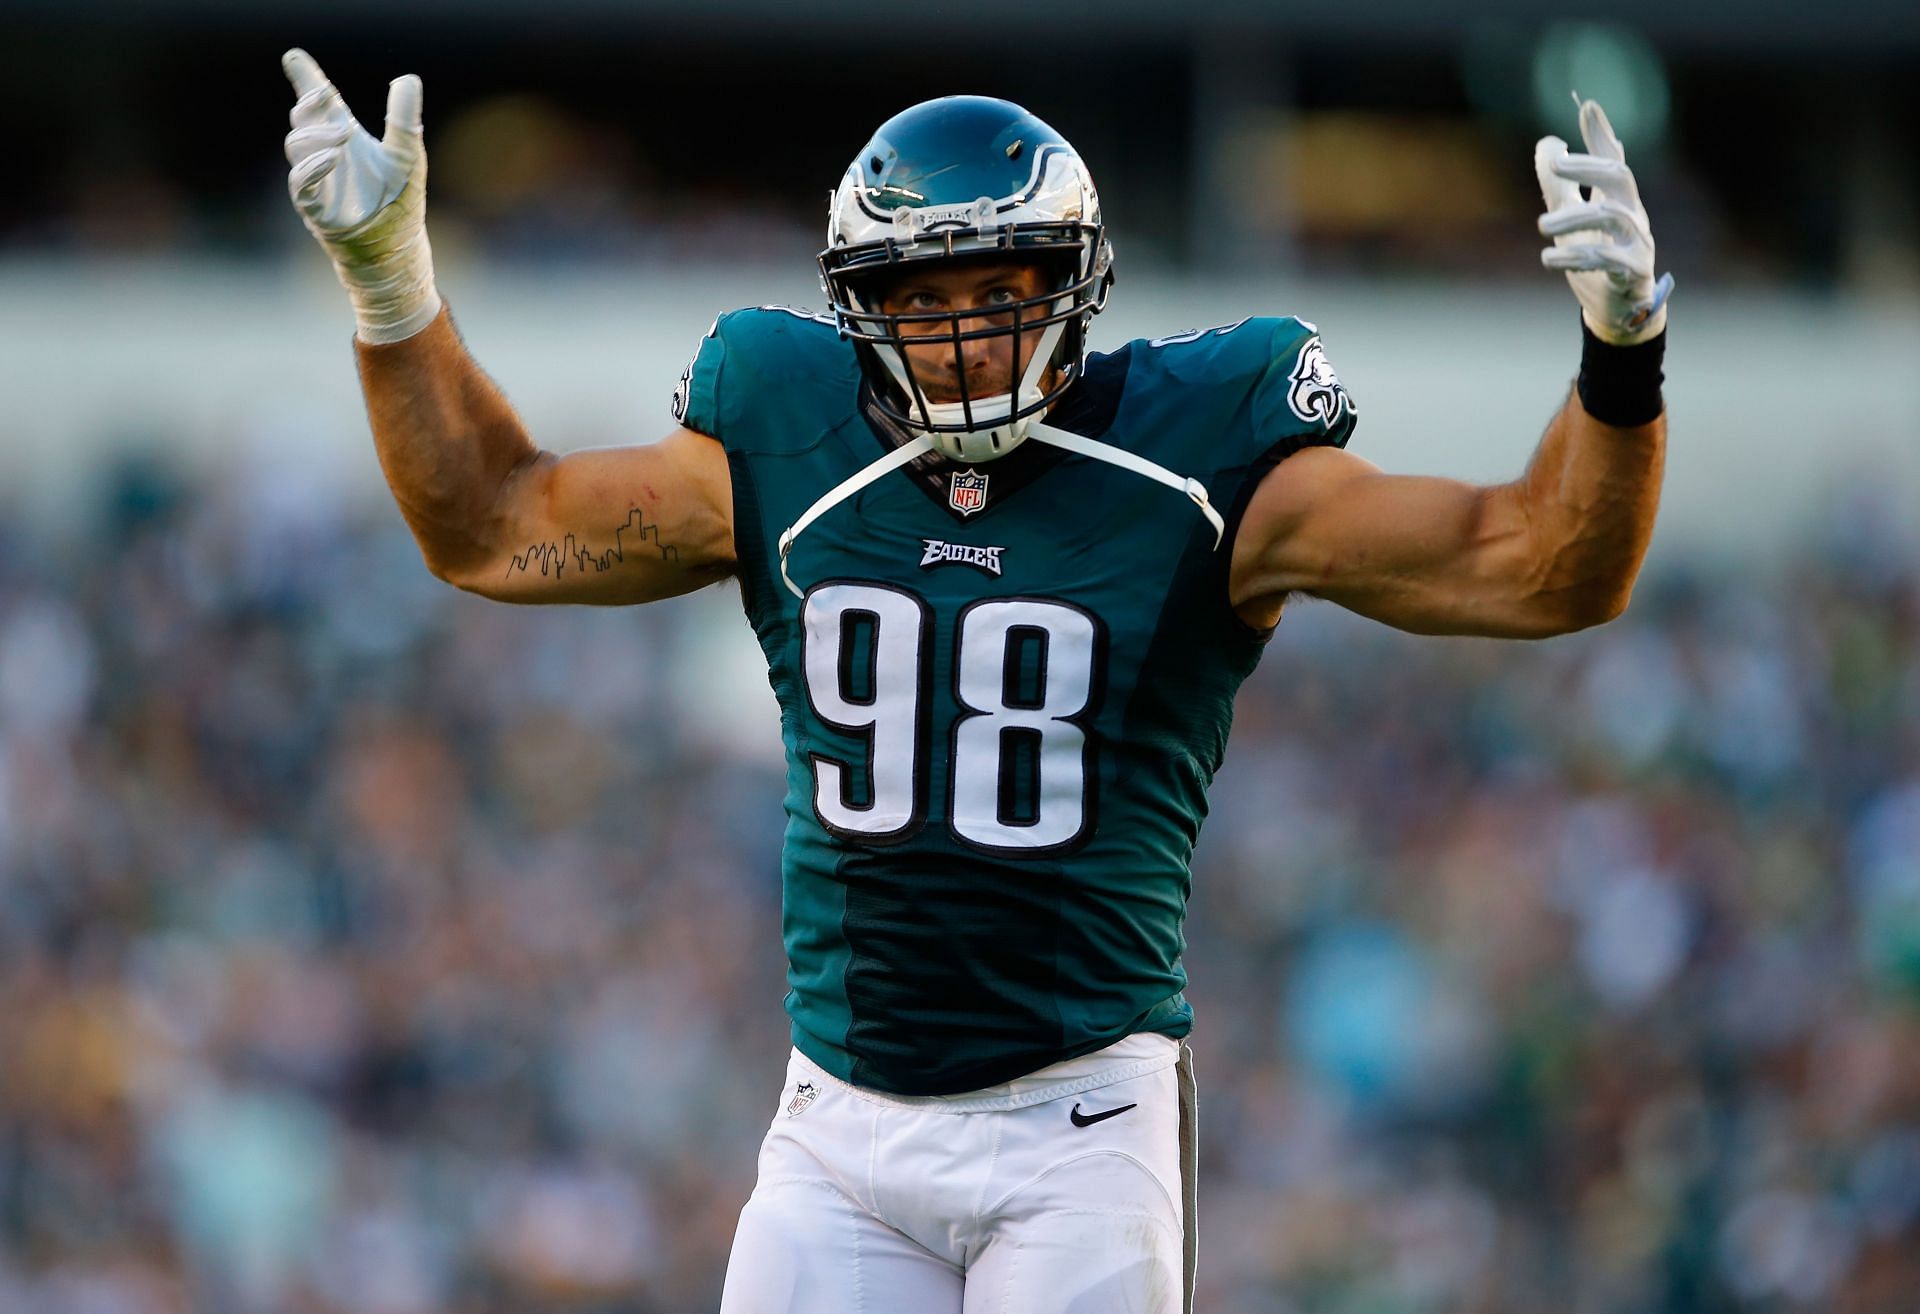 Even after retiring, Barwin is still with the Eagles (Image via Getty Images)